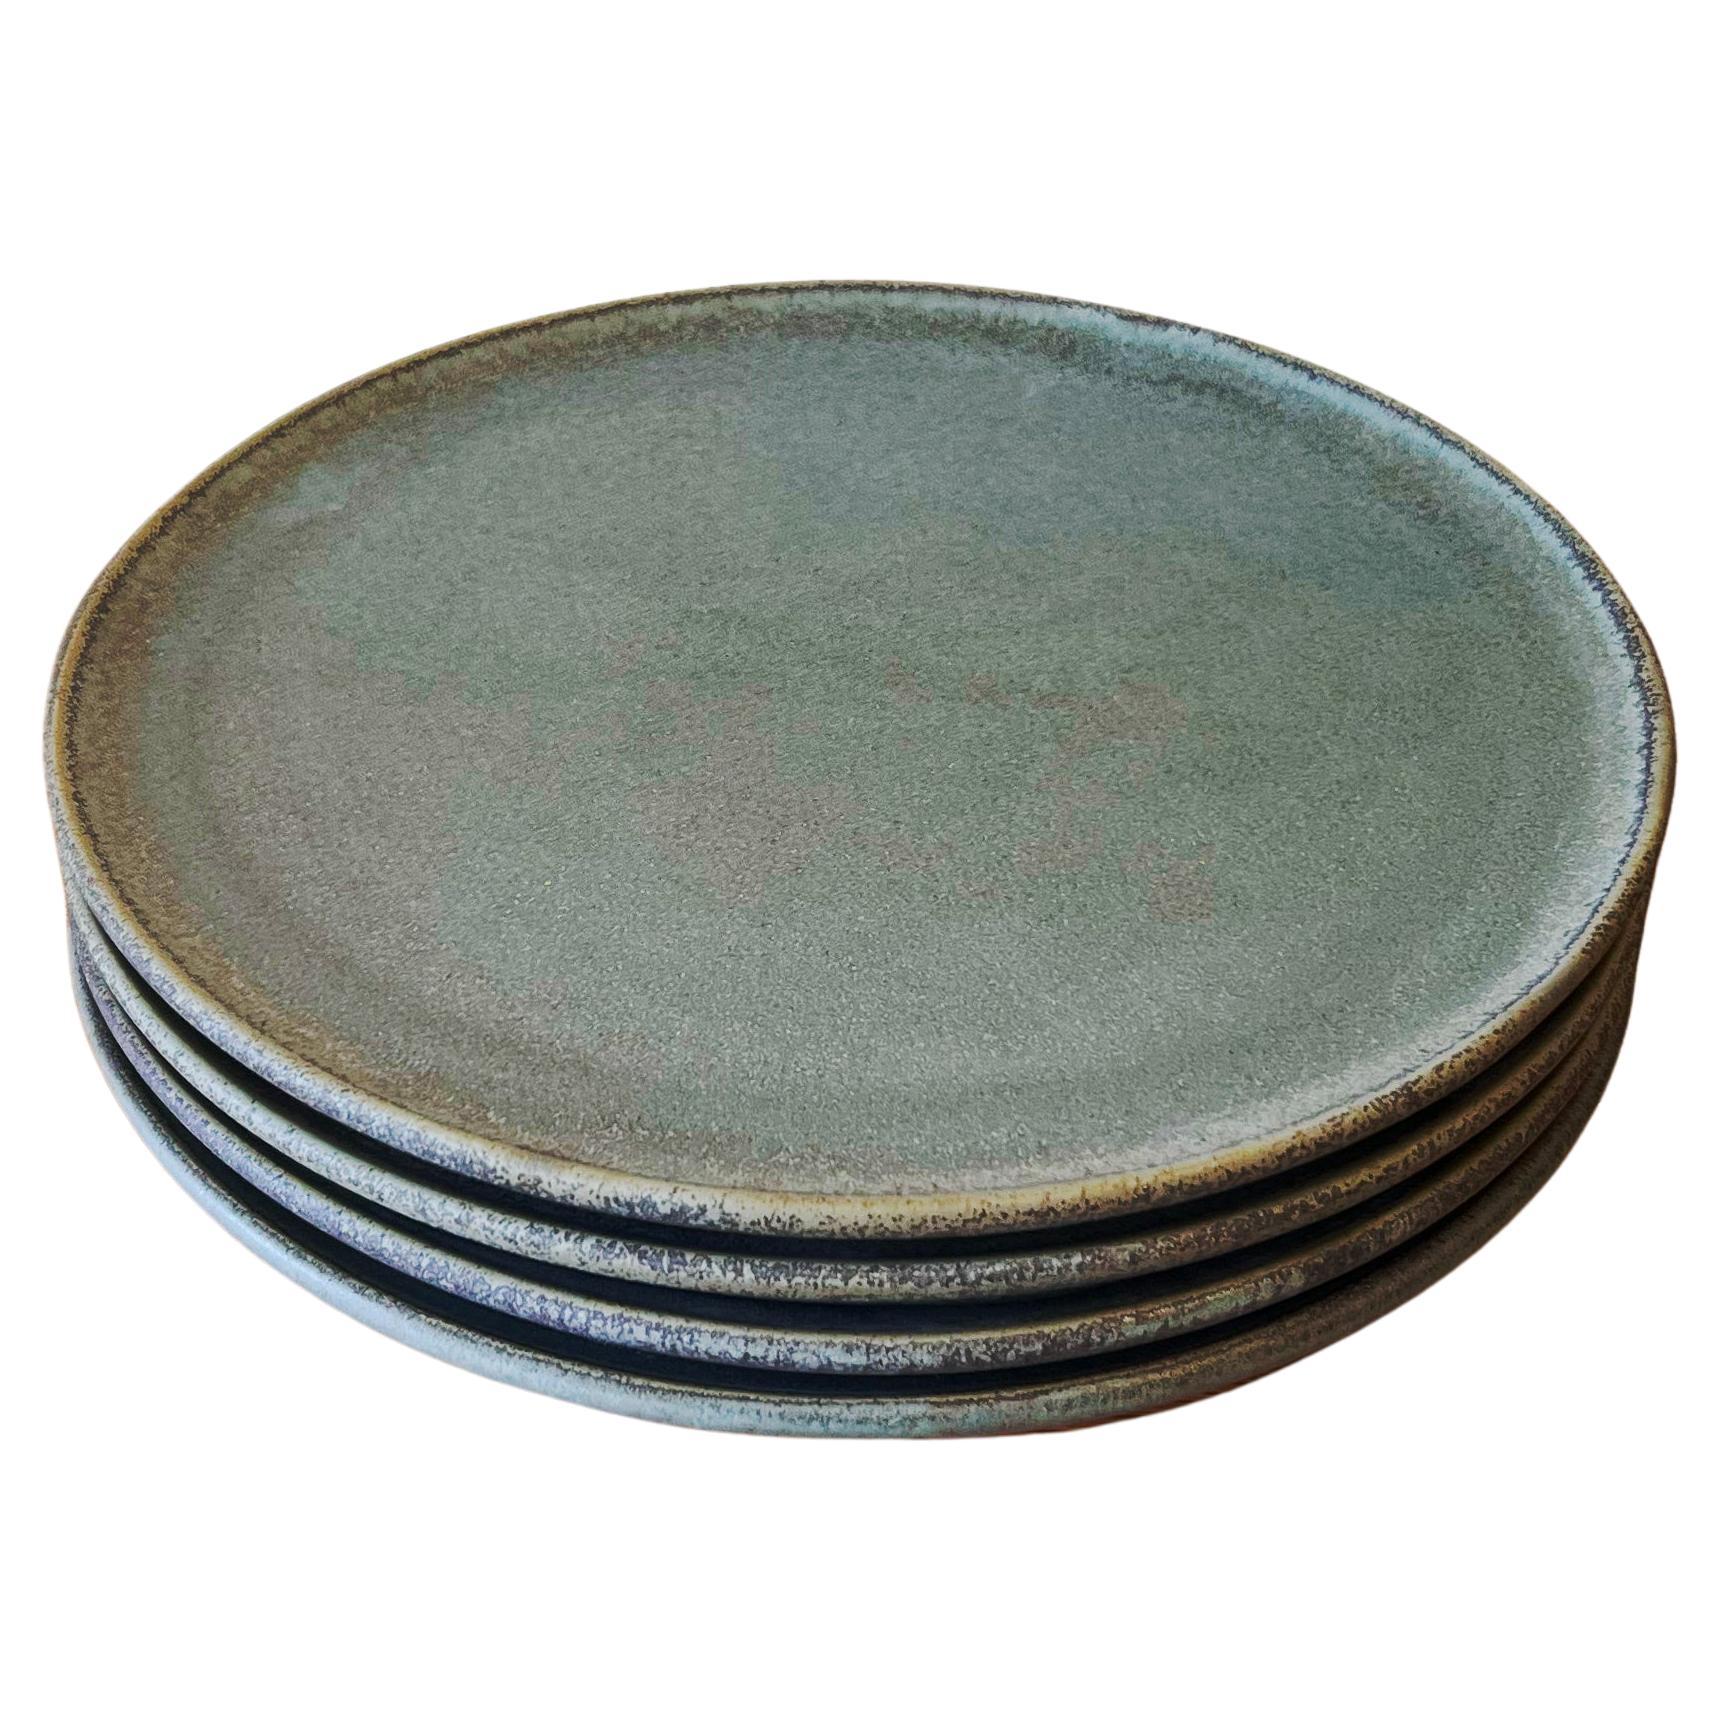 Aqua ceramic dinner plates, set of 4.

For those that want a show stopping dinner set, these dreamy aqua dinner plates are the perfect decor item to add to your collection. The organic blue green surface of these elegant dinner plates has a subtle